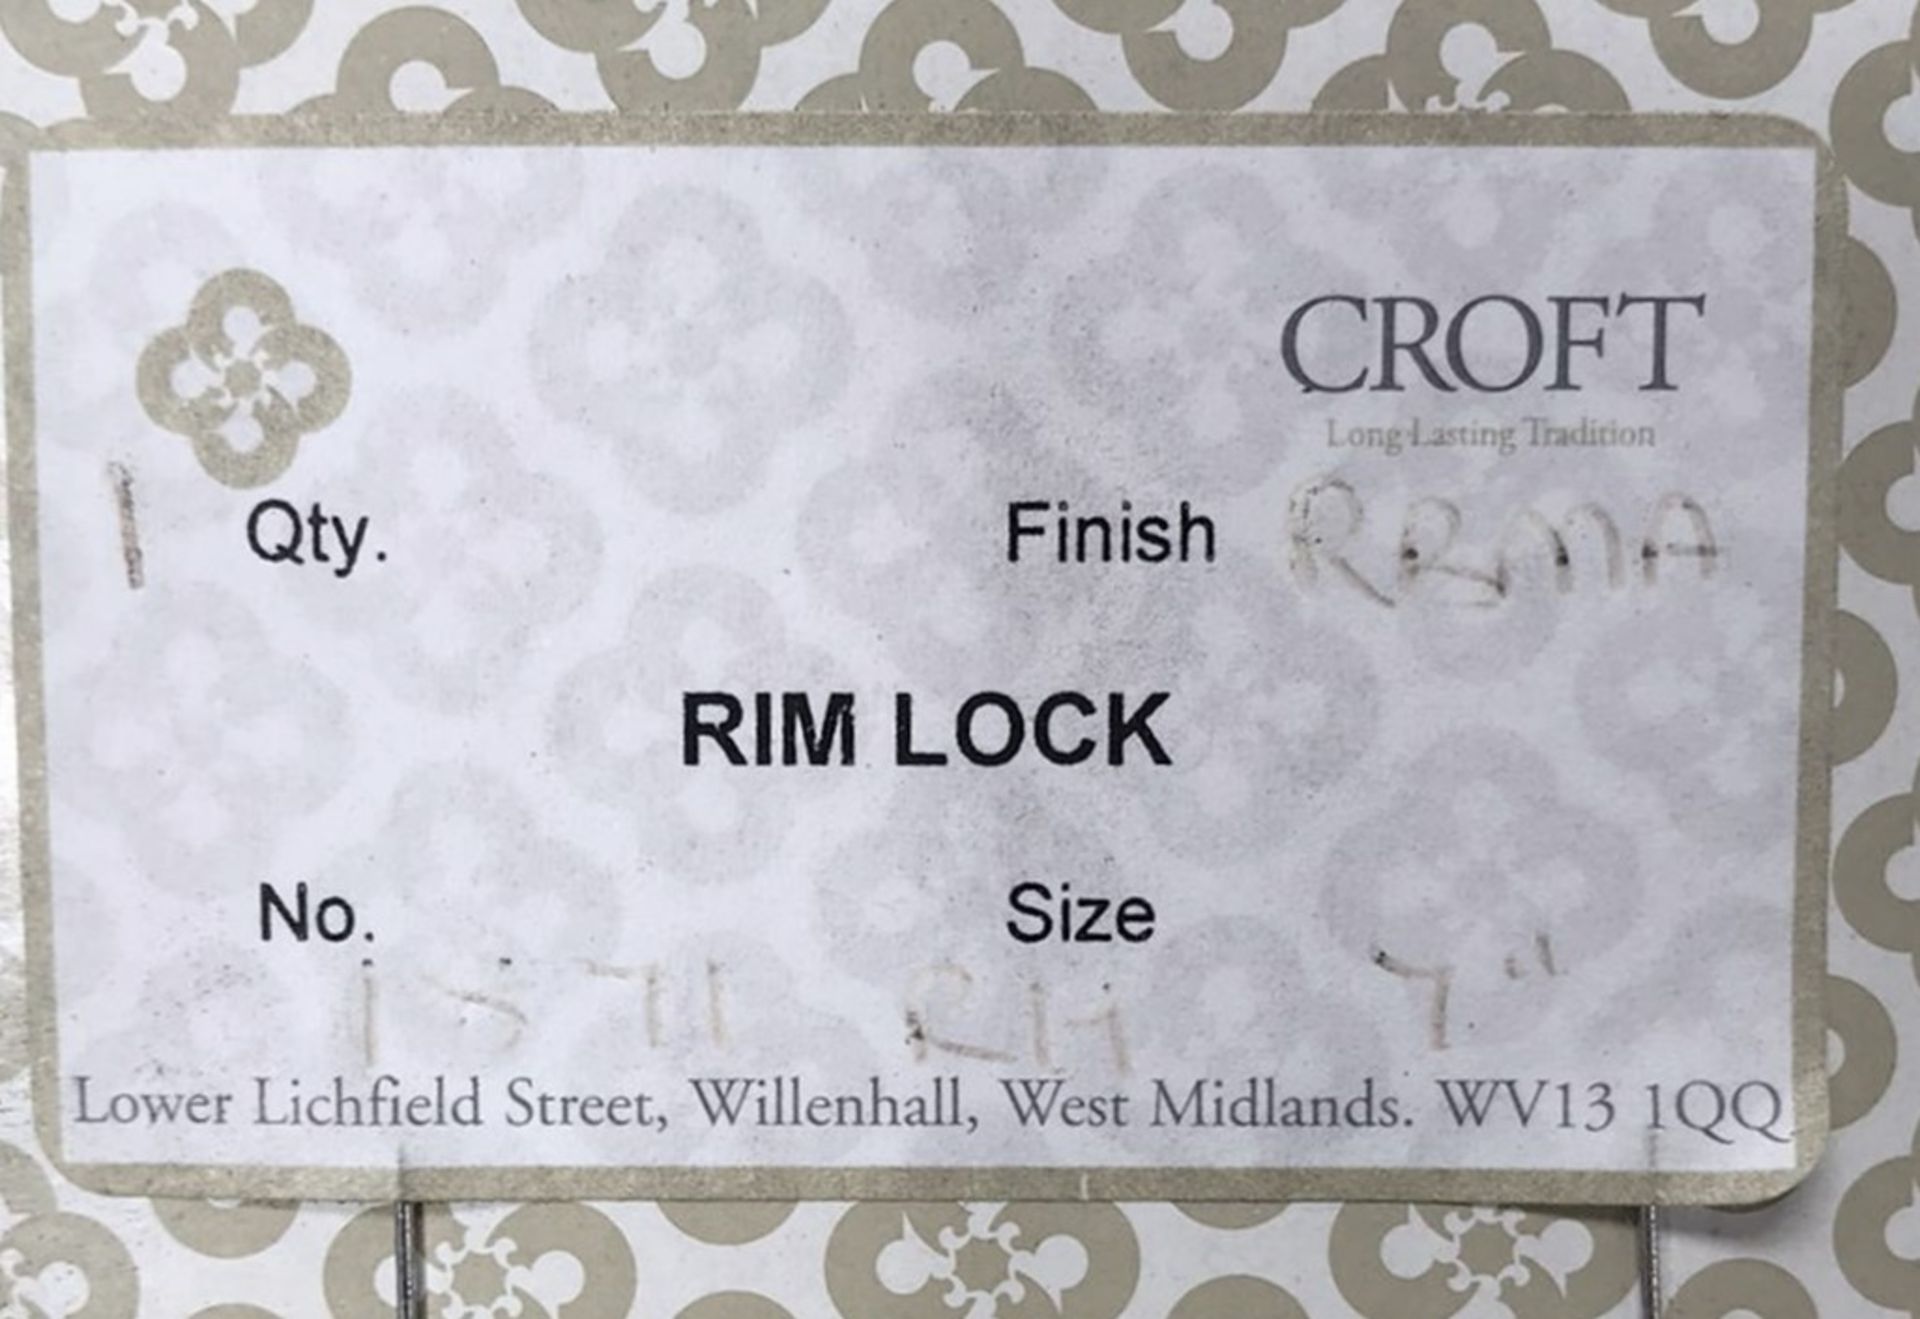 1 x Croft Rim Lock Finished in Real Bronze Metal Antique - Right Hand 7 Inch Size - RRP £398 - Brand - Image 2 of 2